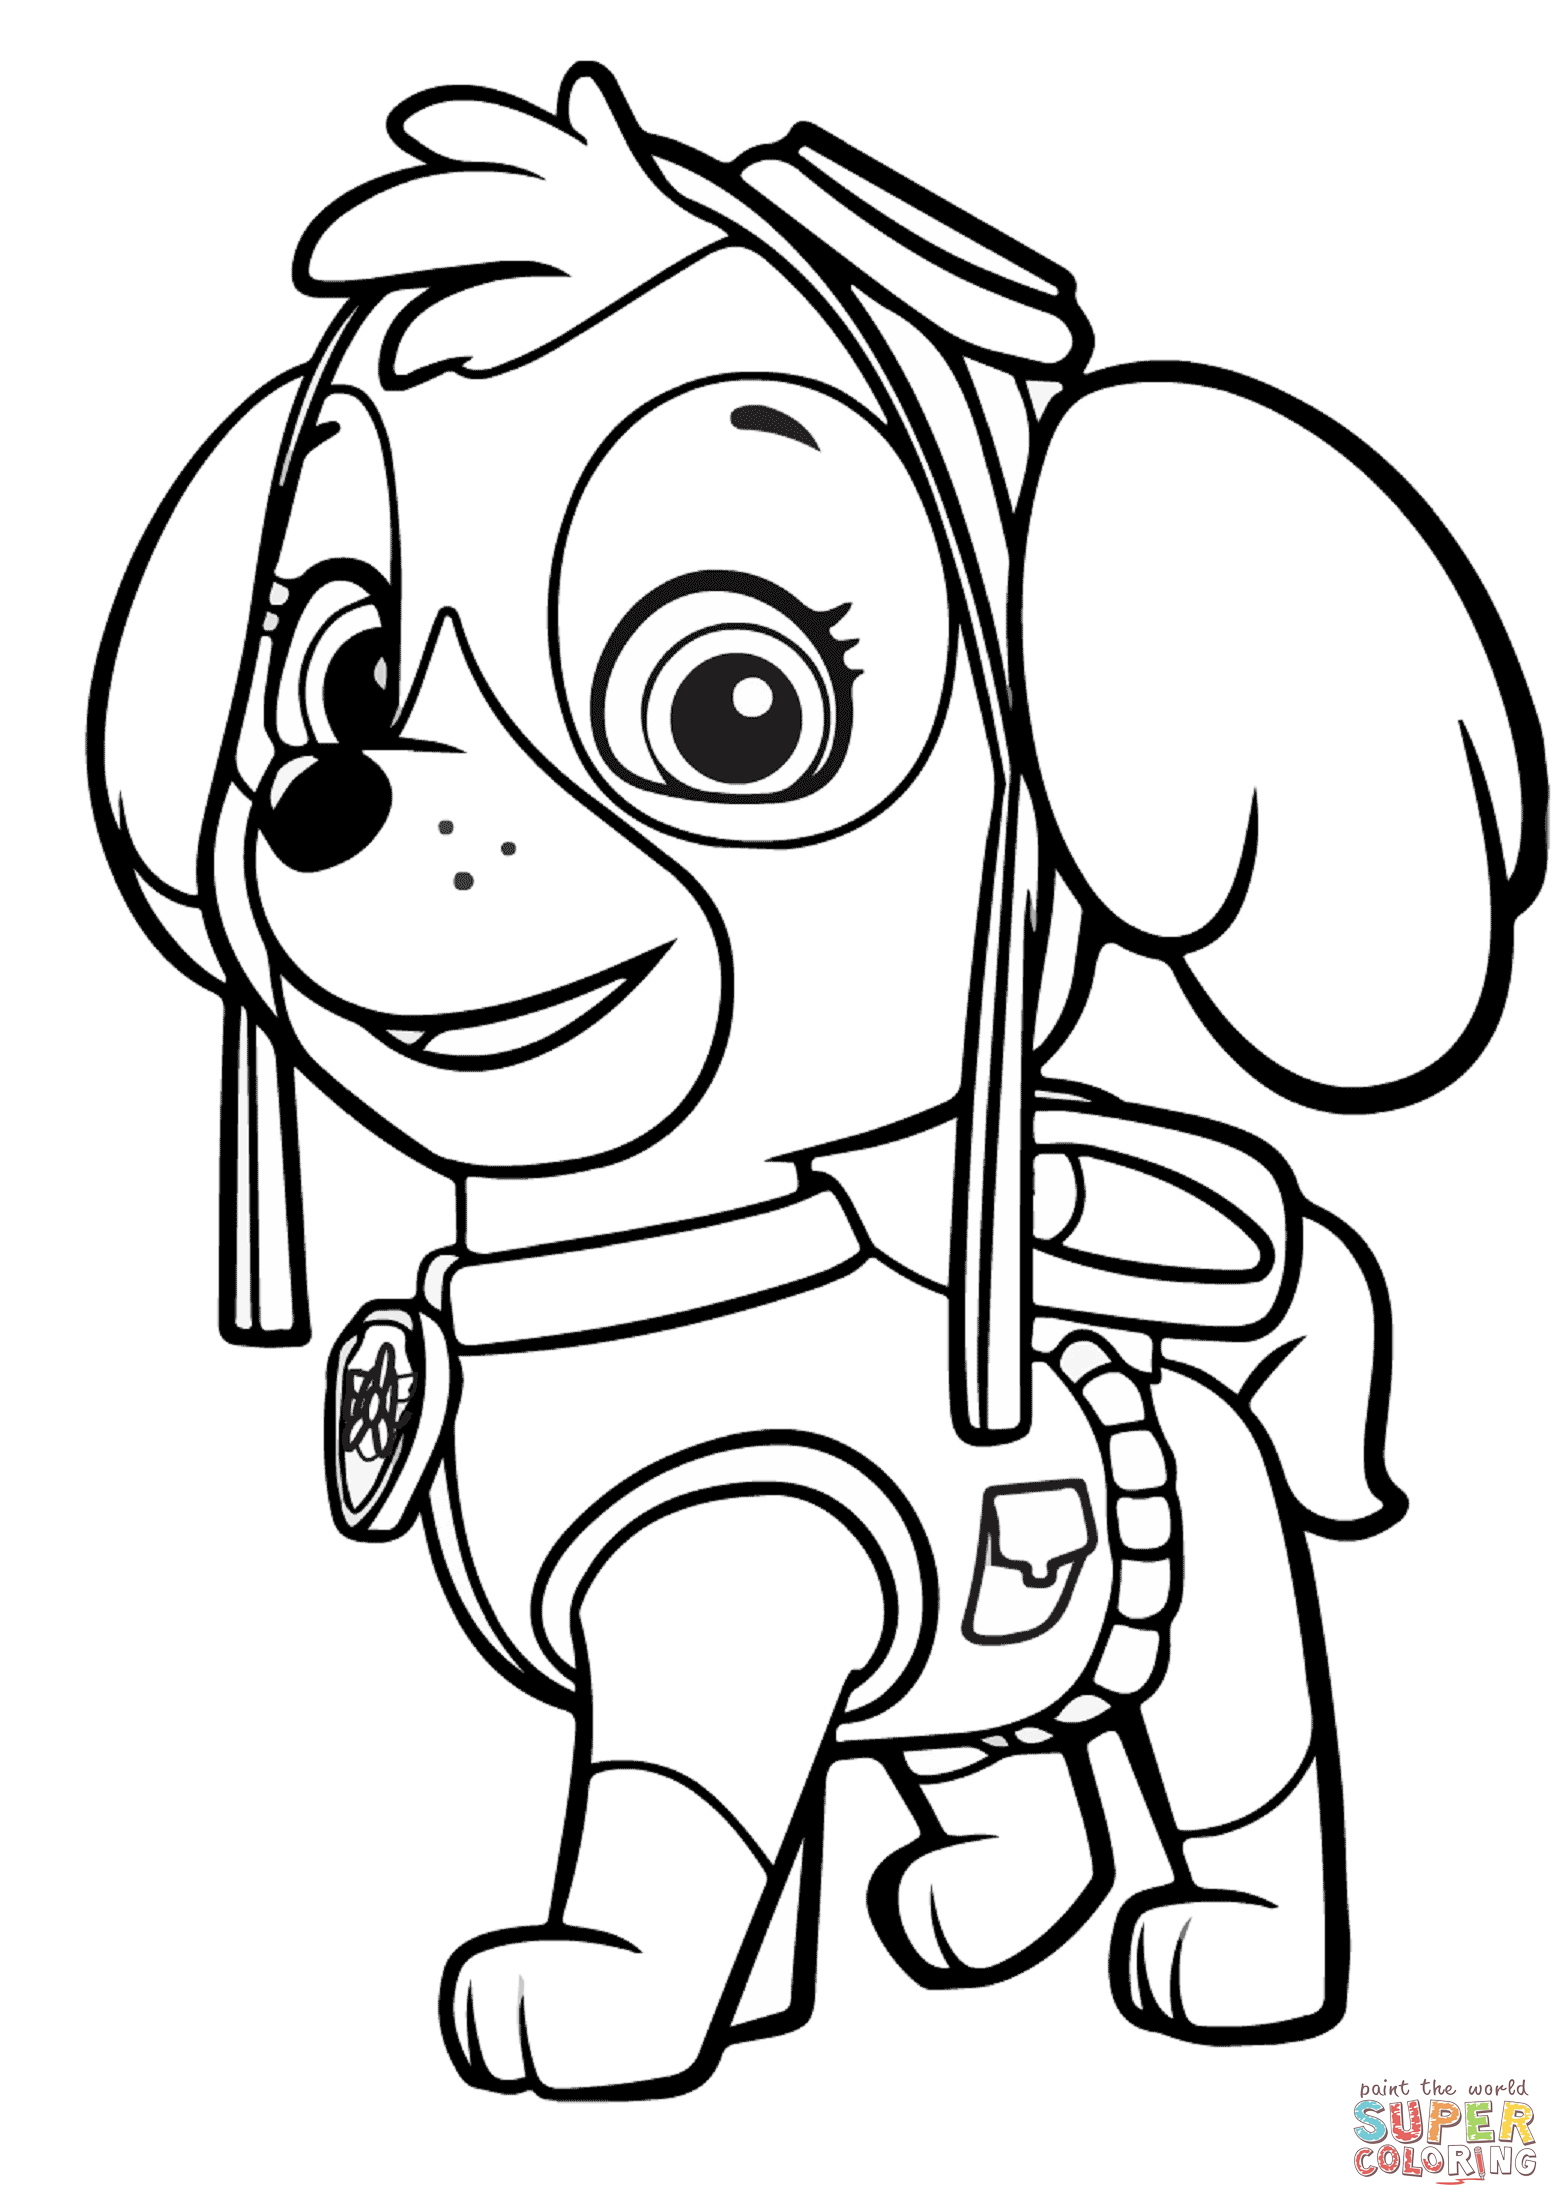 Paw Patrol Skye coloring page | Free Printable Coloring Pages